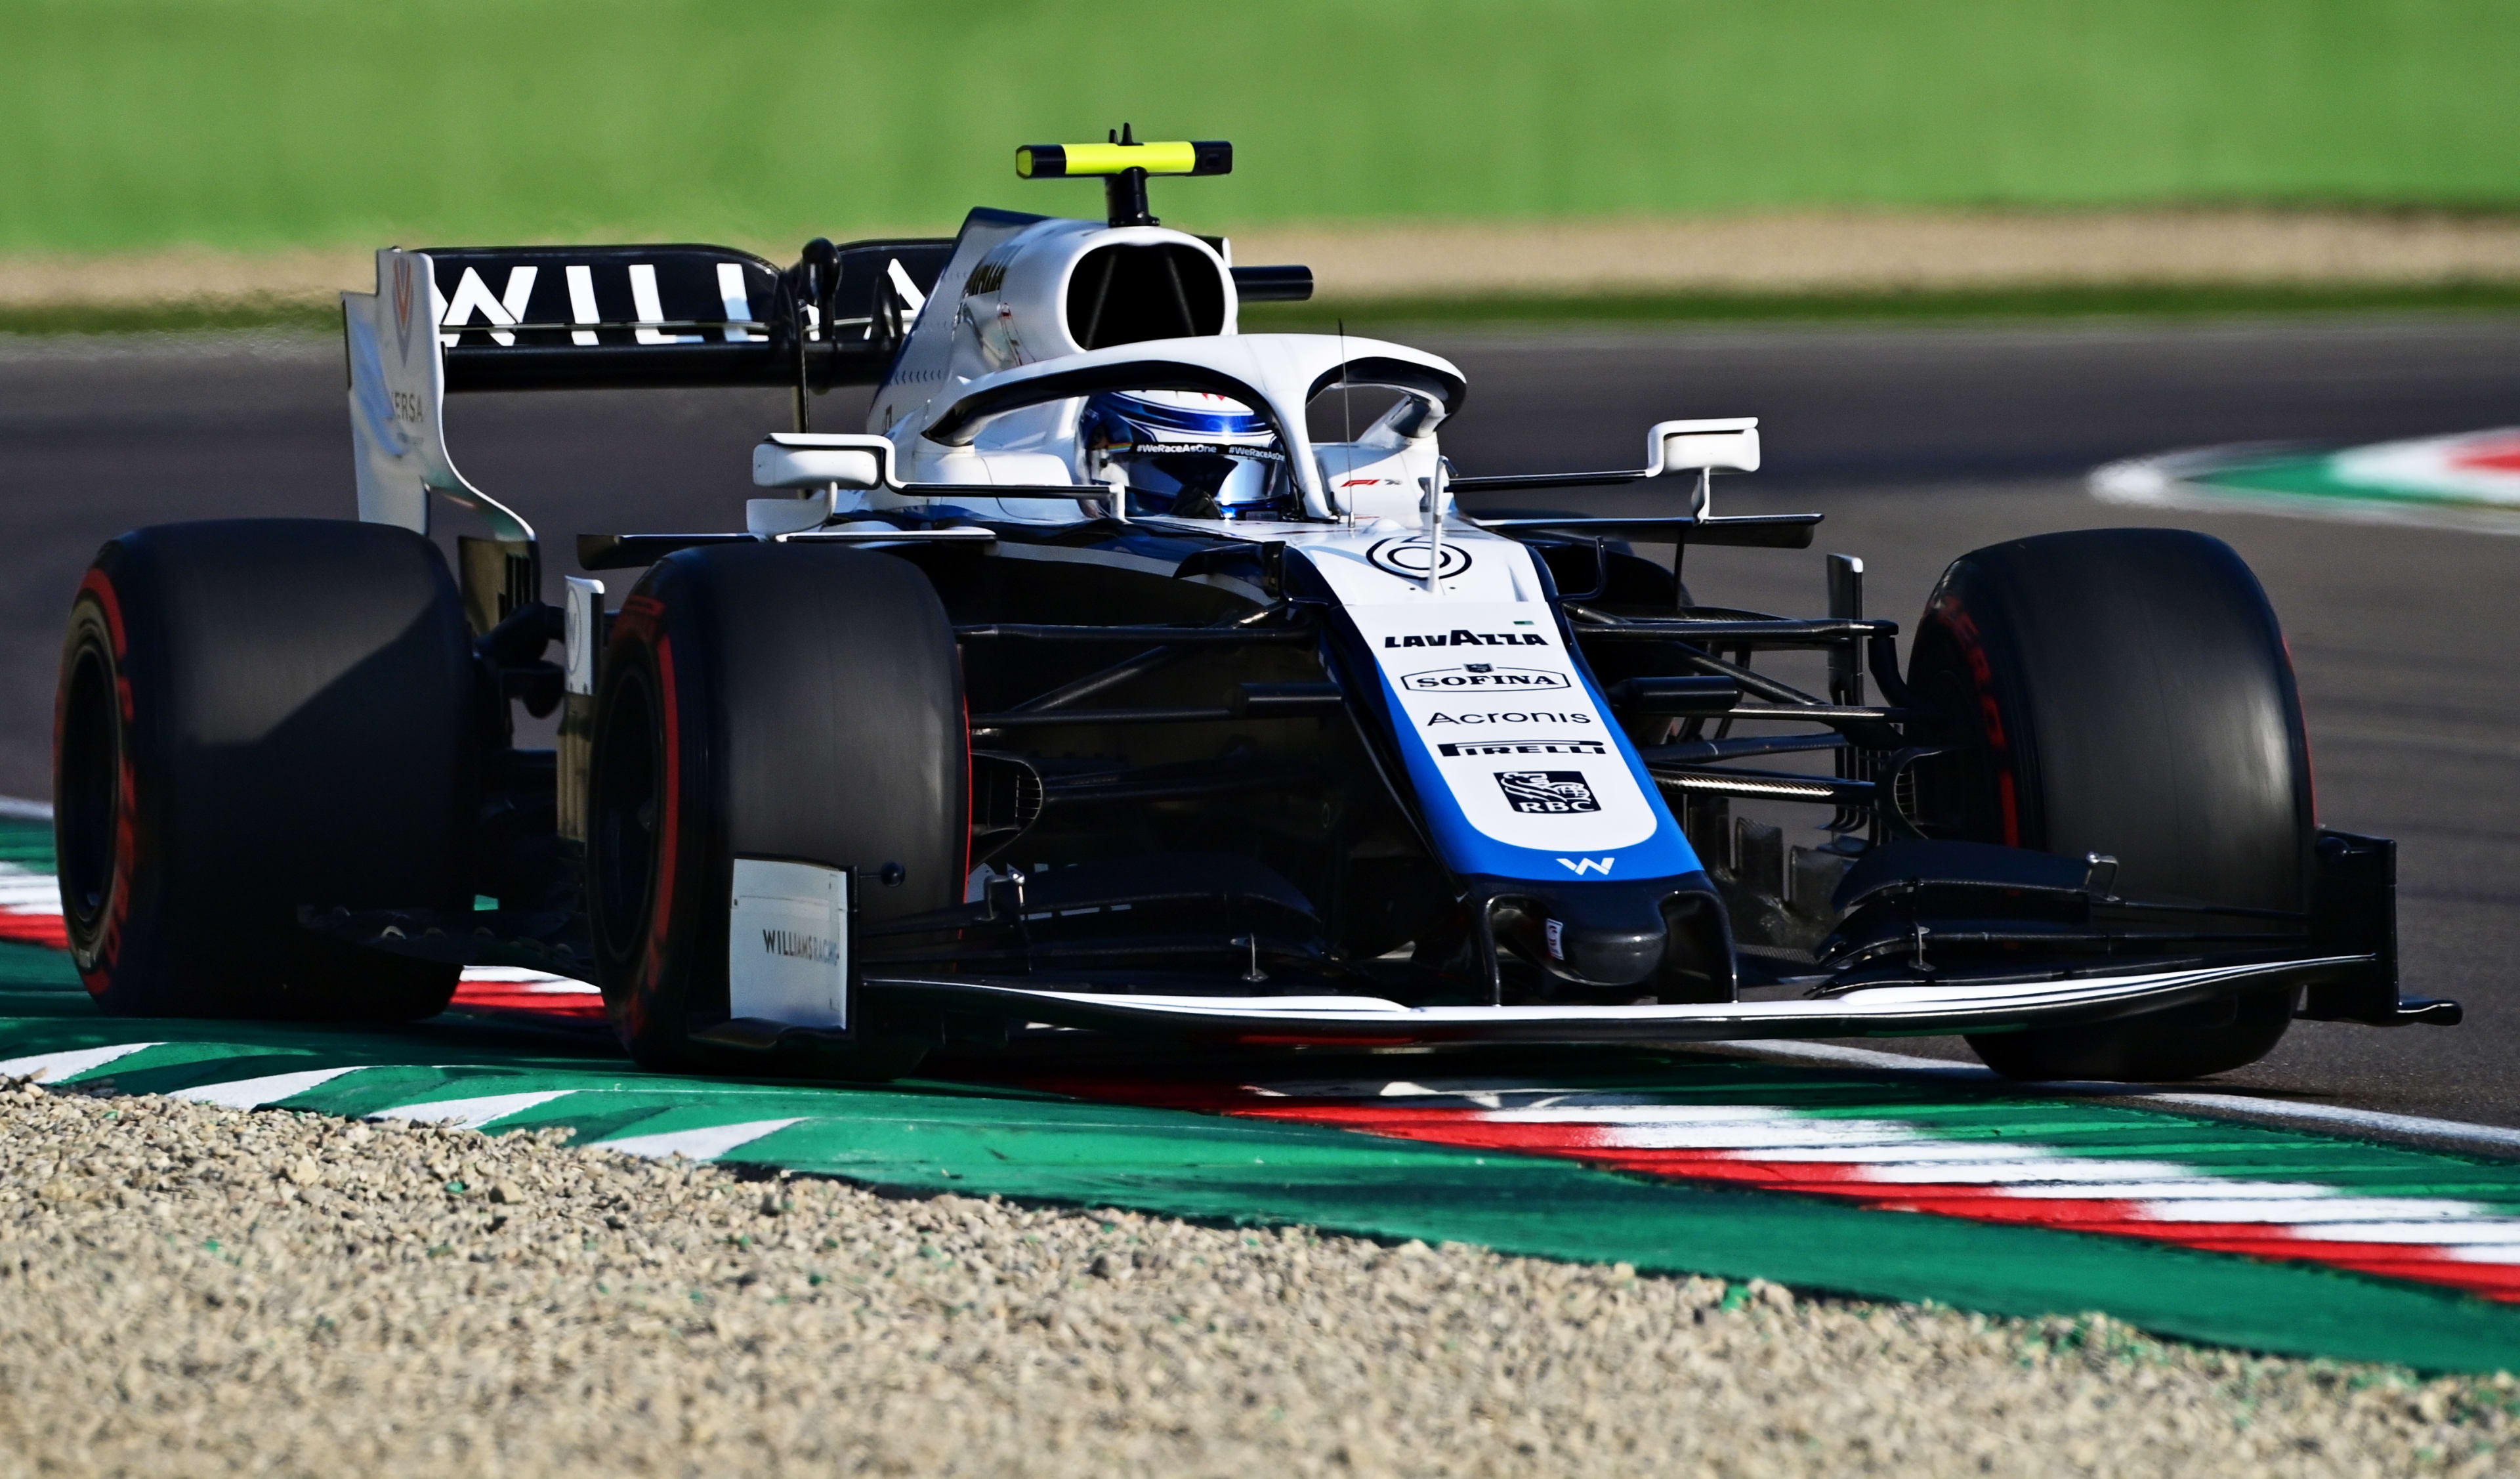 Latifi frustrated that Williams weaknesses prevented late challenge for points in Imola Formula 1®